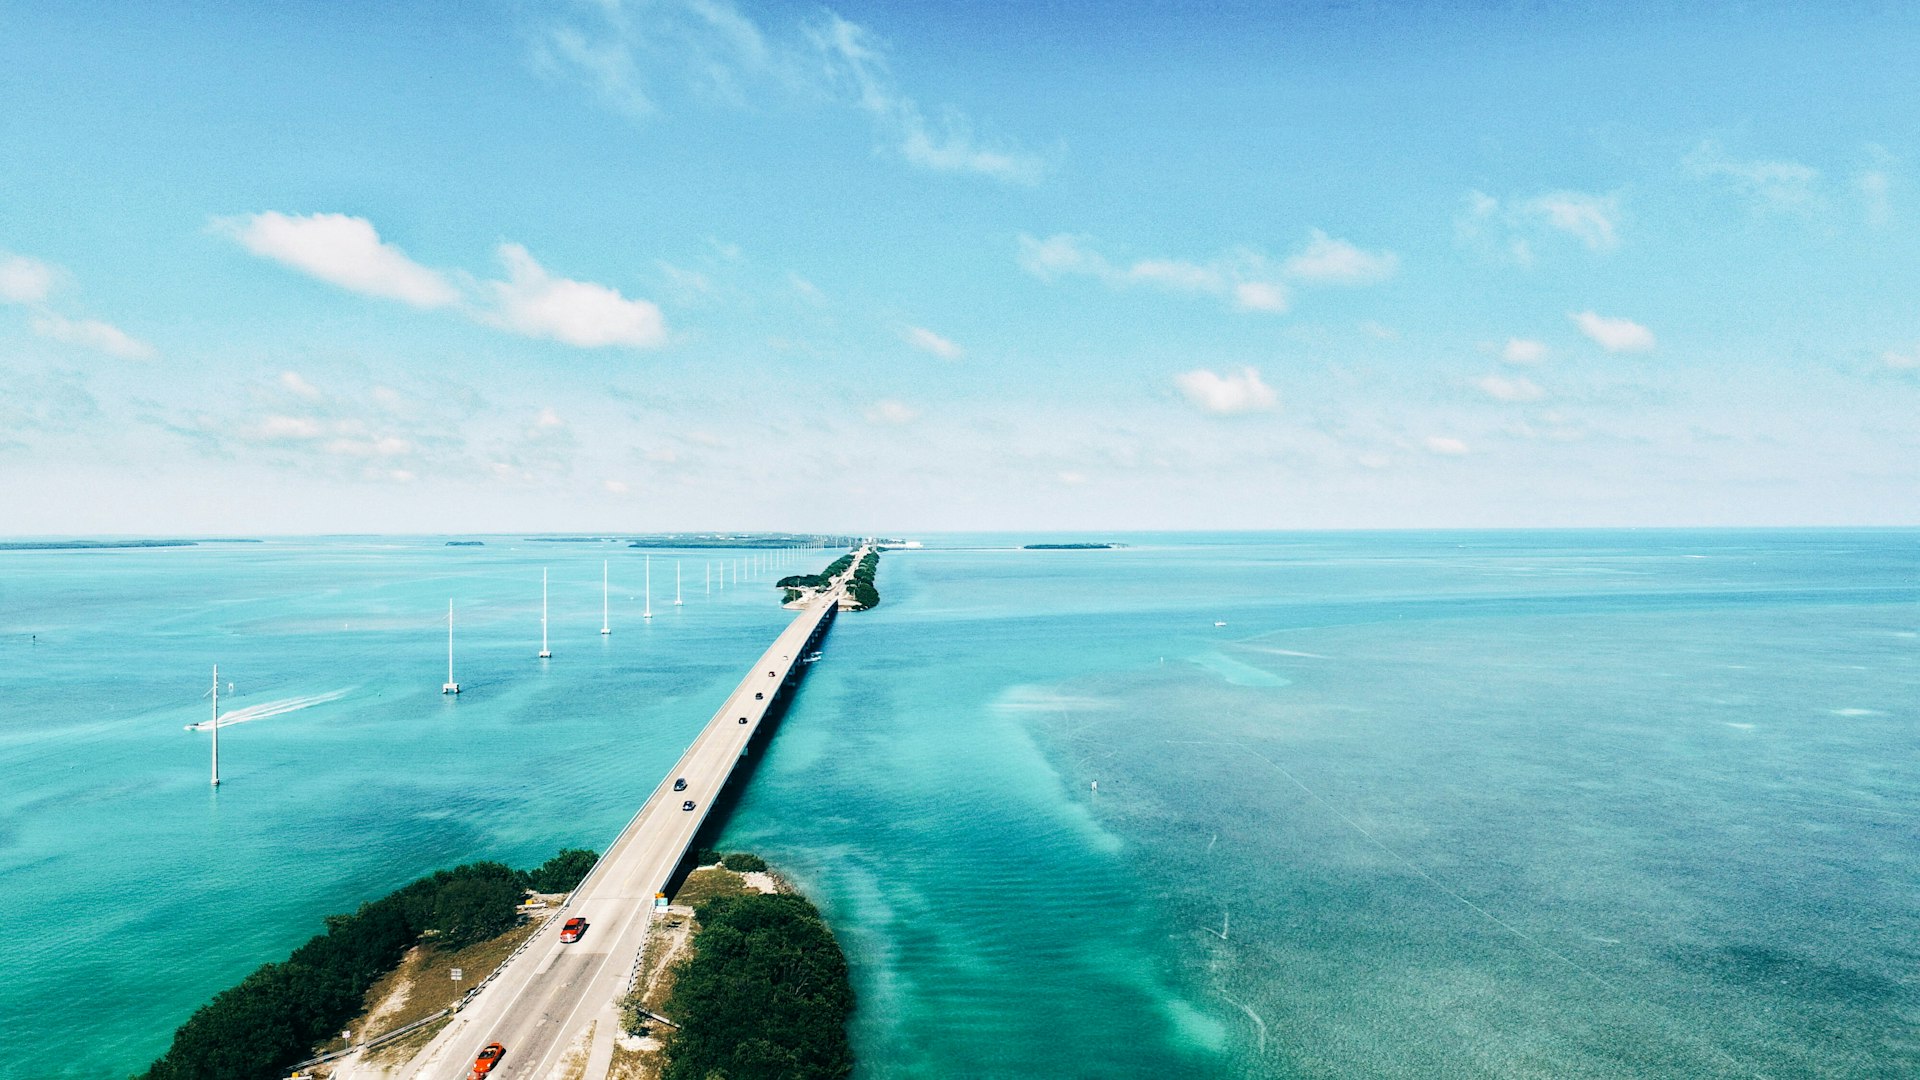 A scenic view of the Overseas Highway, stretching out over turquoise waters in Islamorada, Florida